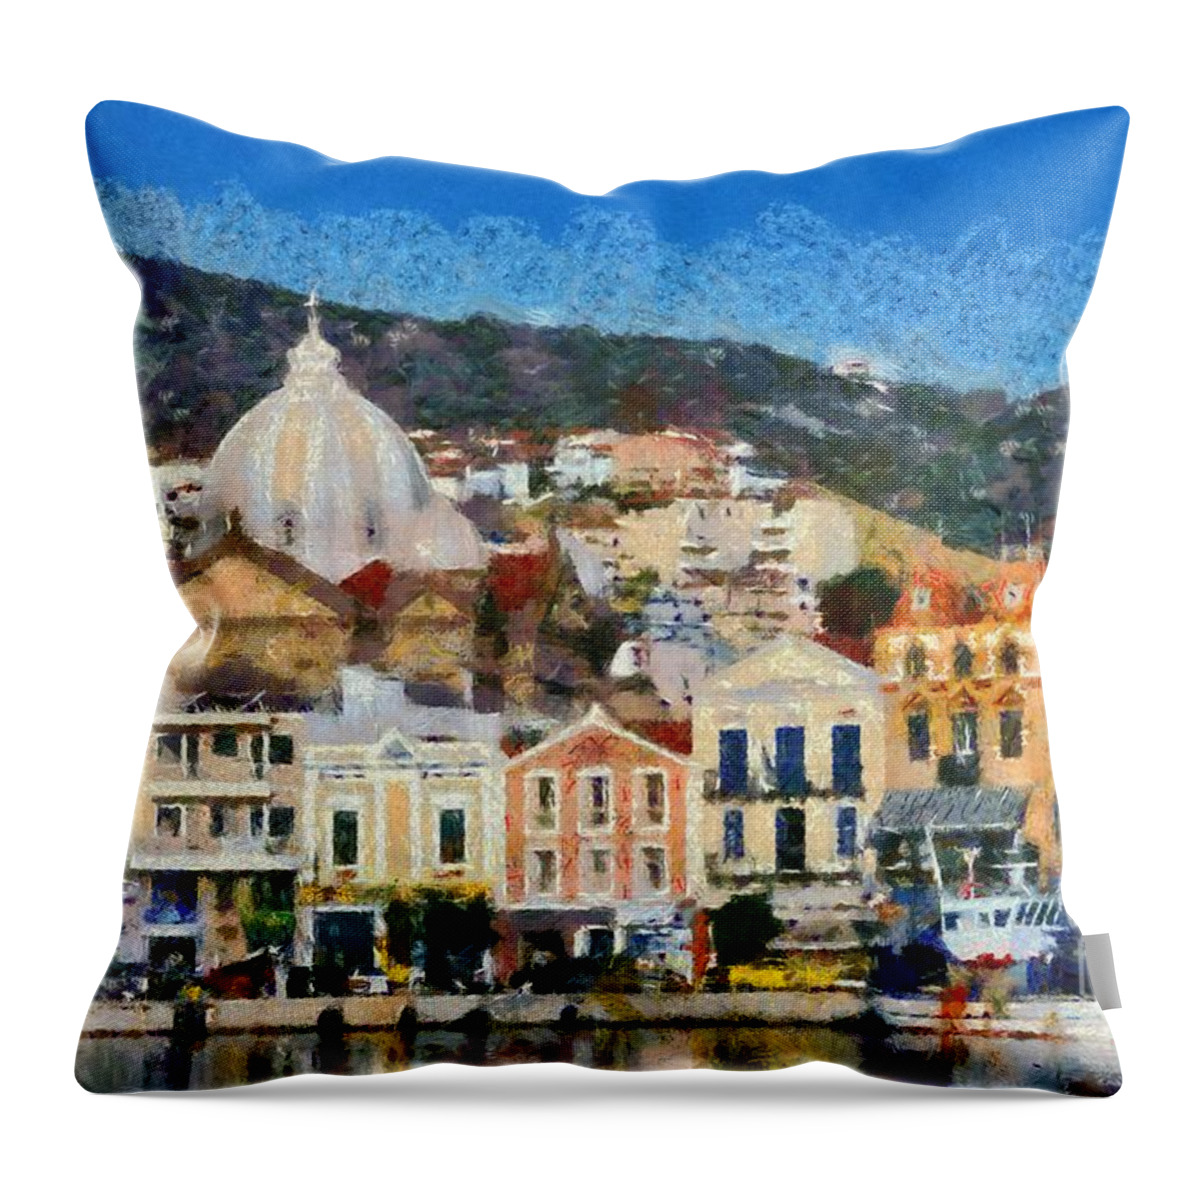 Lesvos; Lesbos; Mytilini; Mitilini; Mytilene; City; Town; Port; Harbor; Islands; Greece; Hellas; Greek; Aegean; Island; Summer; Holidays; Vacation; Tourism; Touristic; Travel; Trip; Voyage; Journey; Buildings; Tradition; Traditional; Architecture; Design; Church Throw Pillow featuring the painting Mytilini port #1 by George Atsametakis